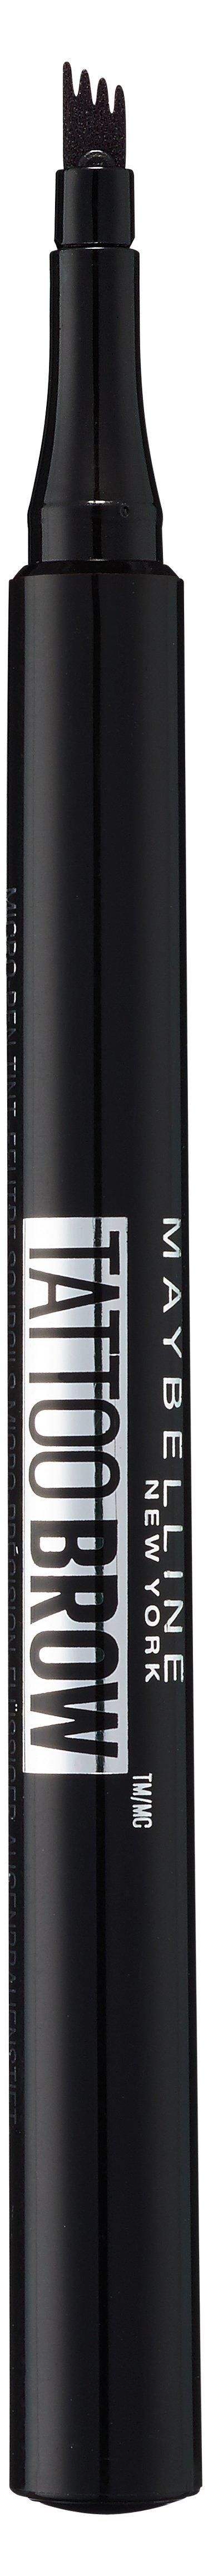 Image of MAYBELLINE New York Tattoo Brow Augenbrauenstift - ONE SIZE